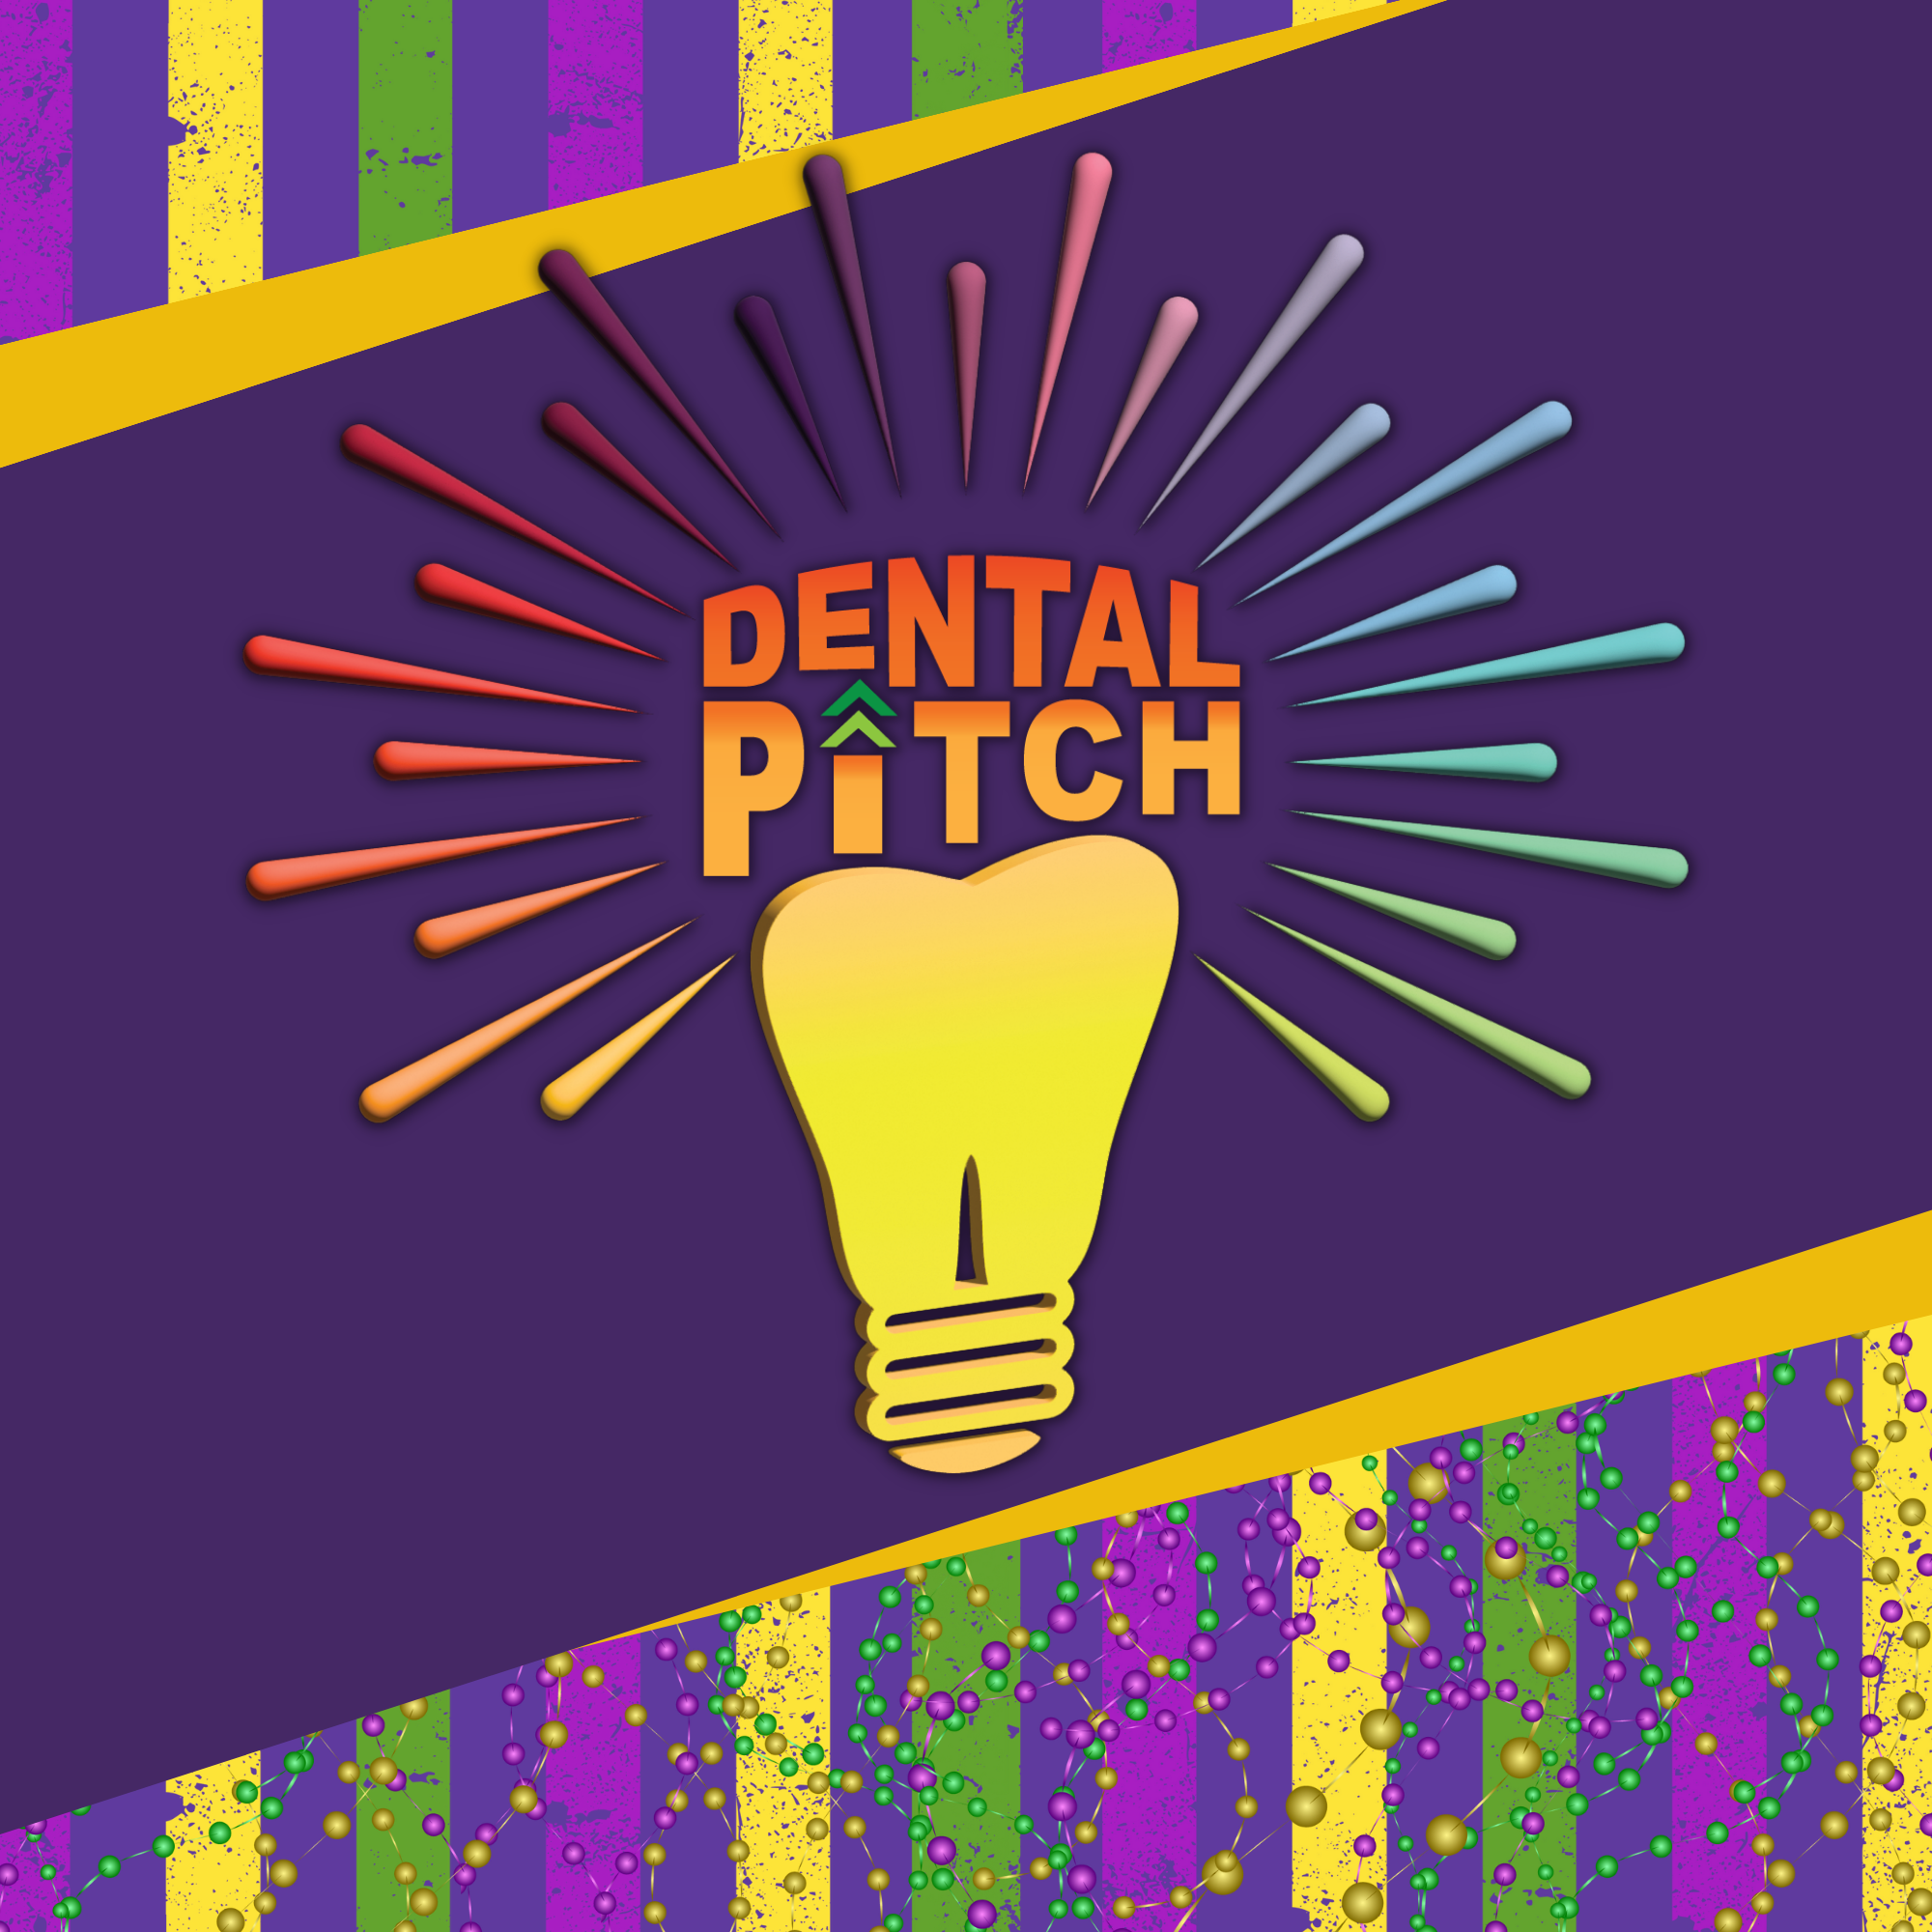 First conference - The dental pitch